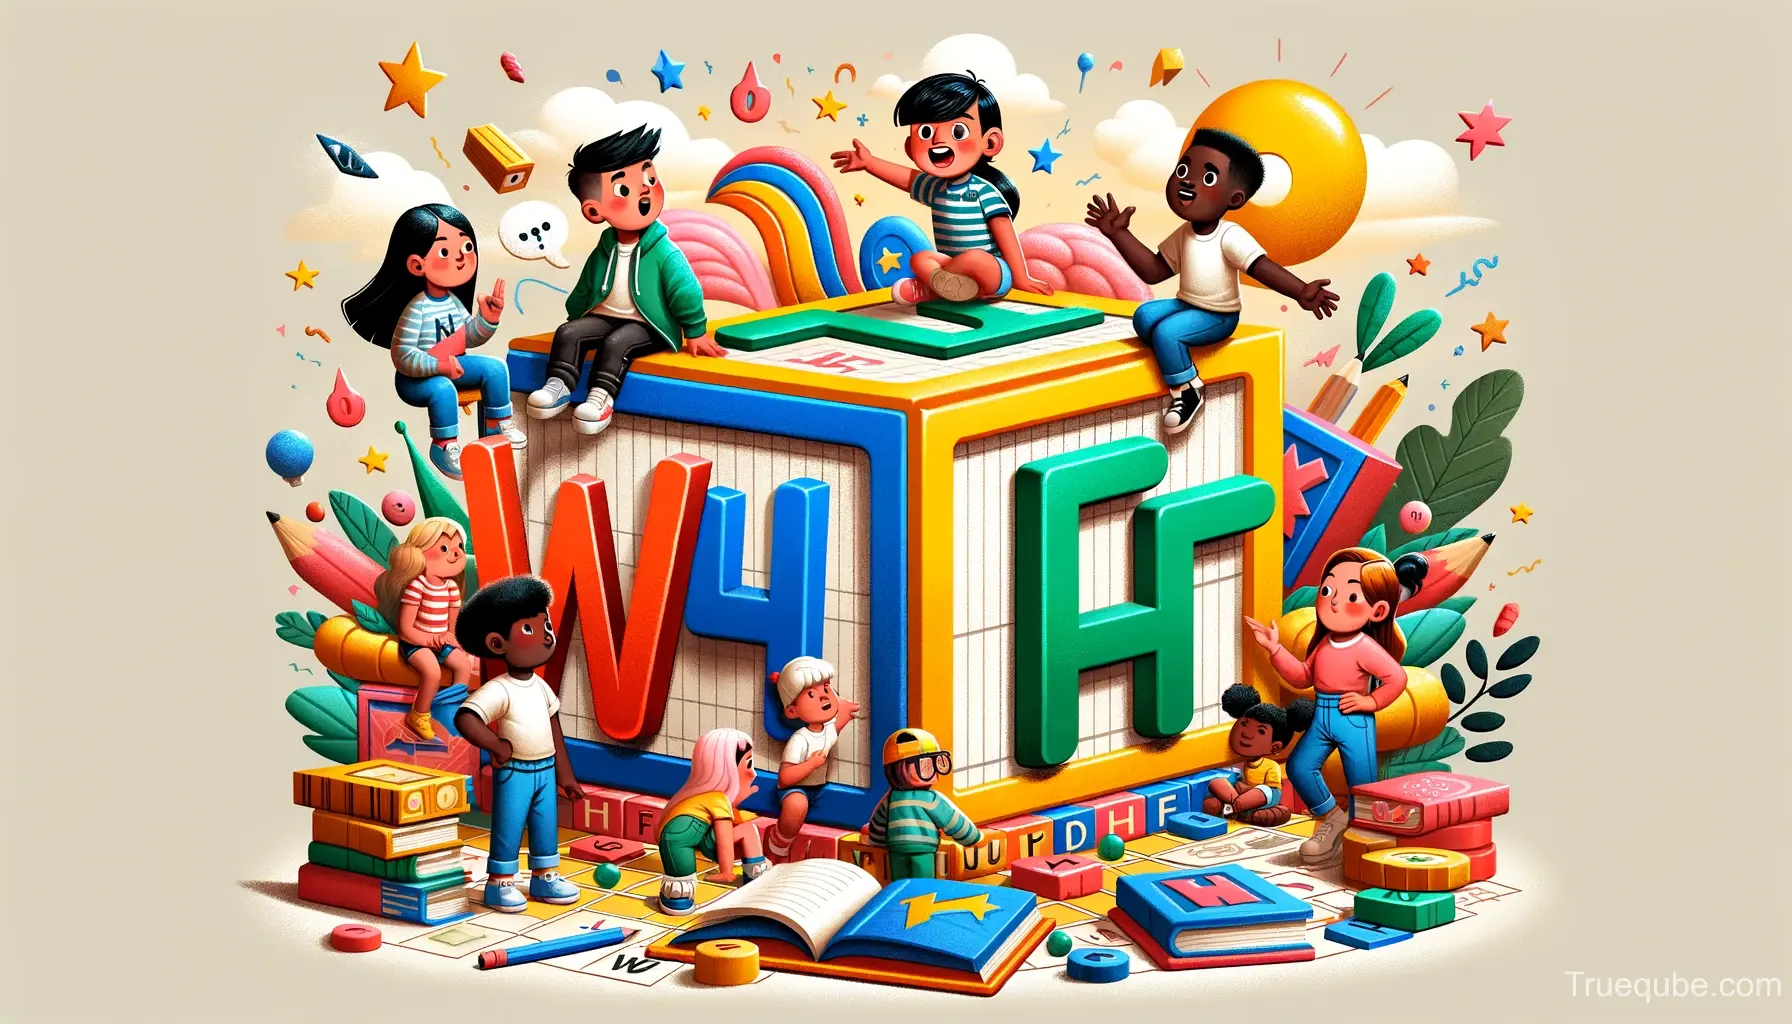 5 Letter Words Starting With Whif